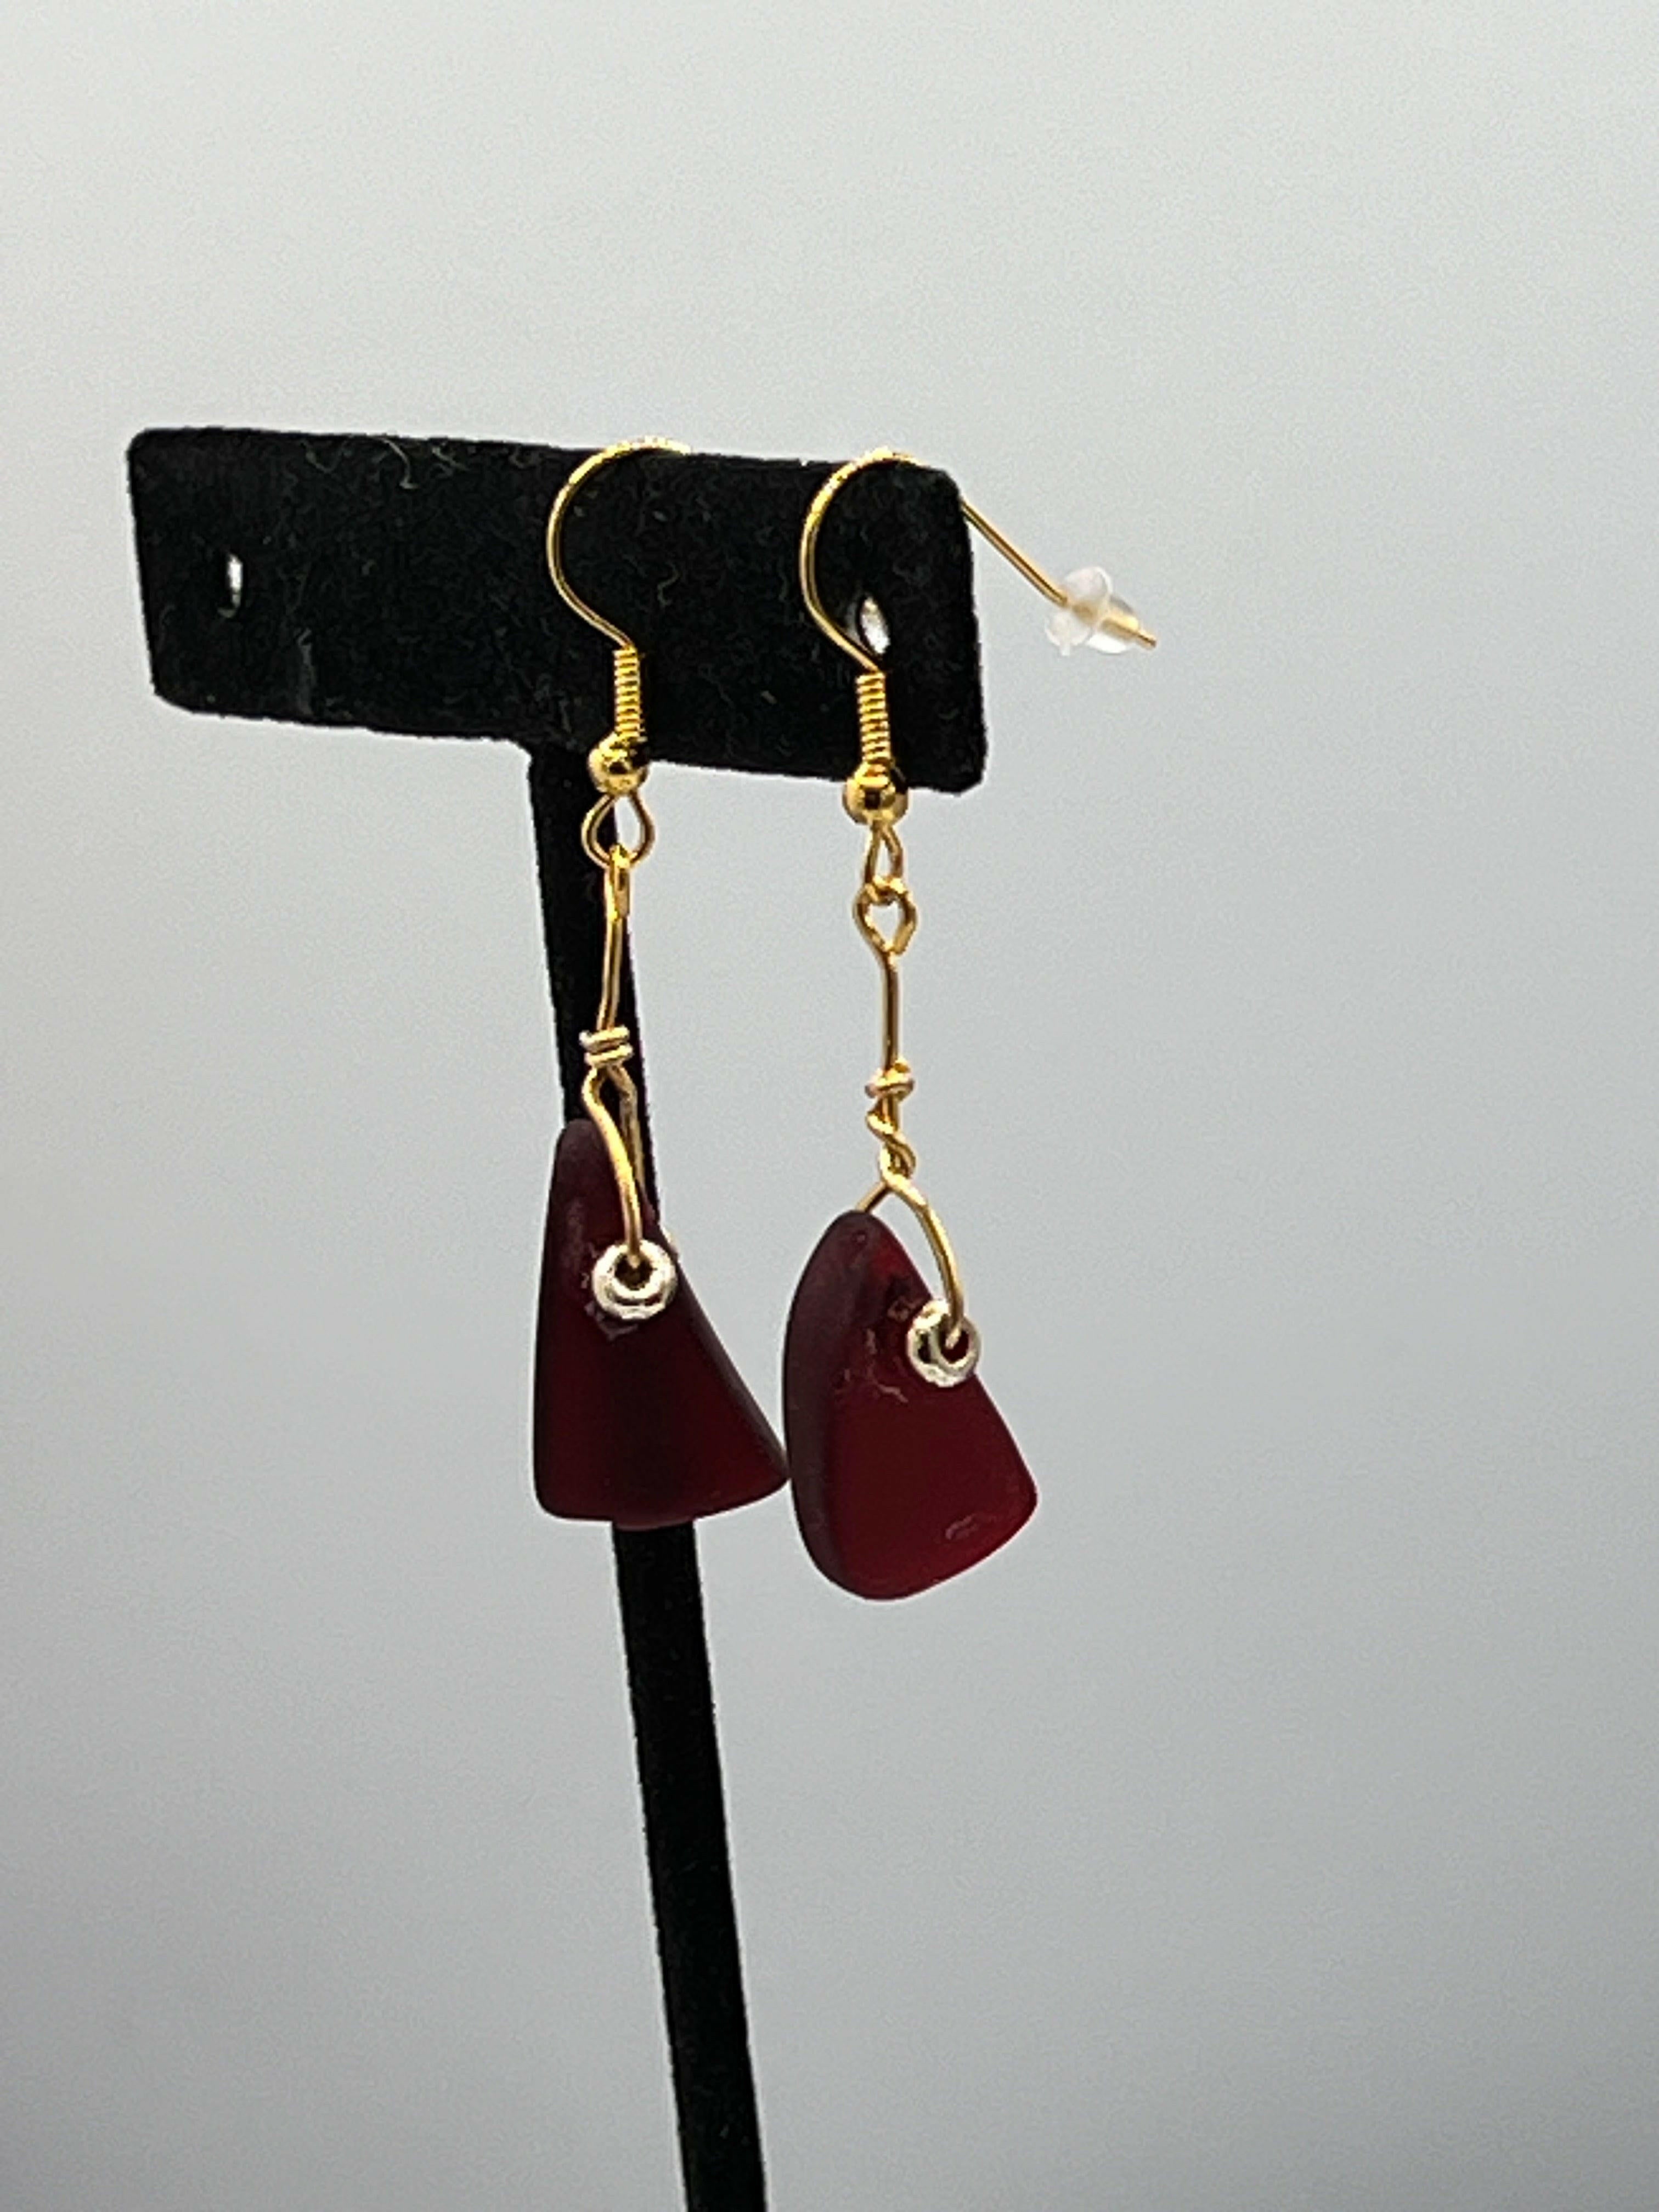 Bec Sue Jewelry Shop Scarlet Whispers: Tumbled Glass Dangling Earrings Tags